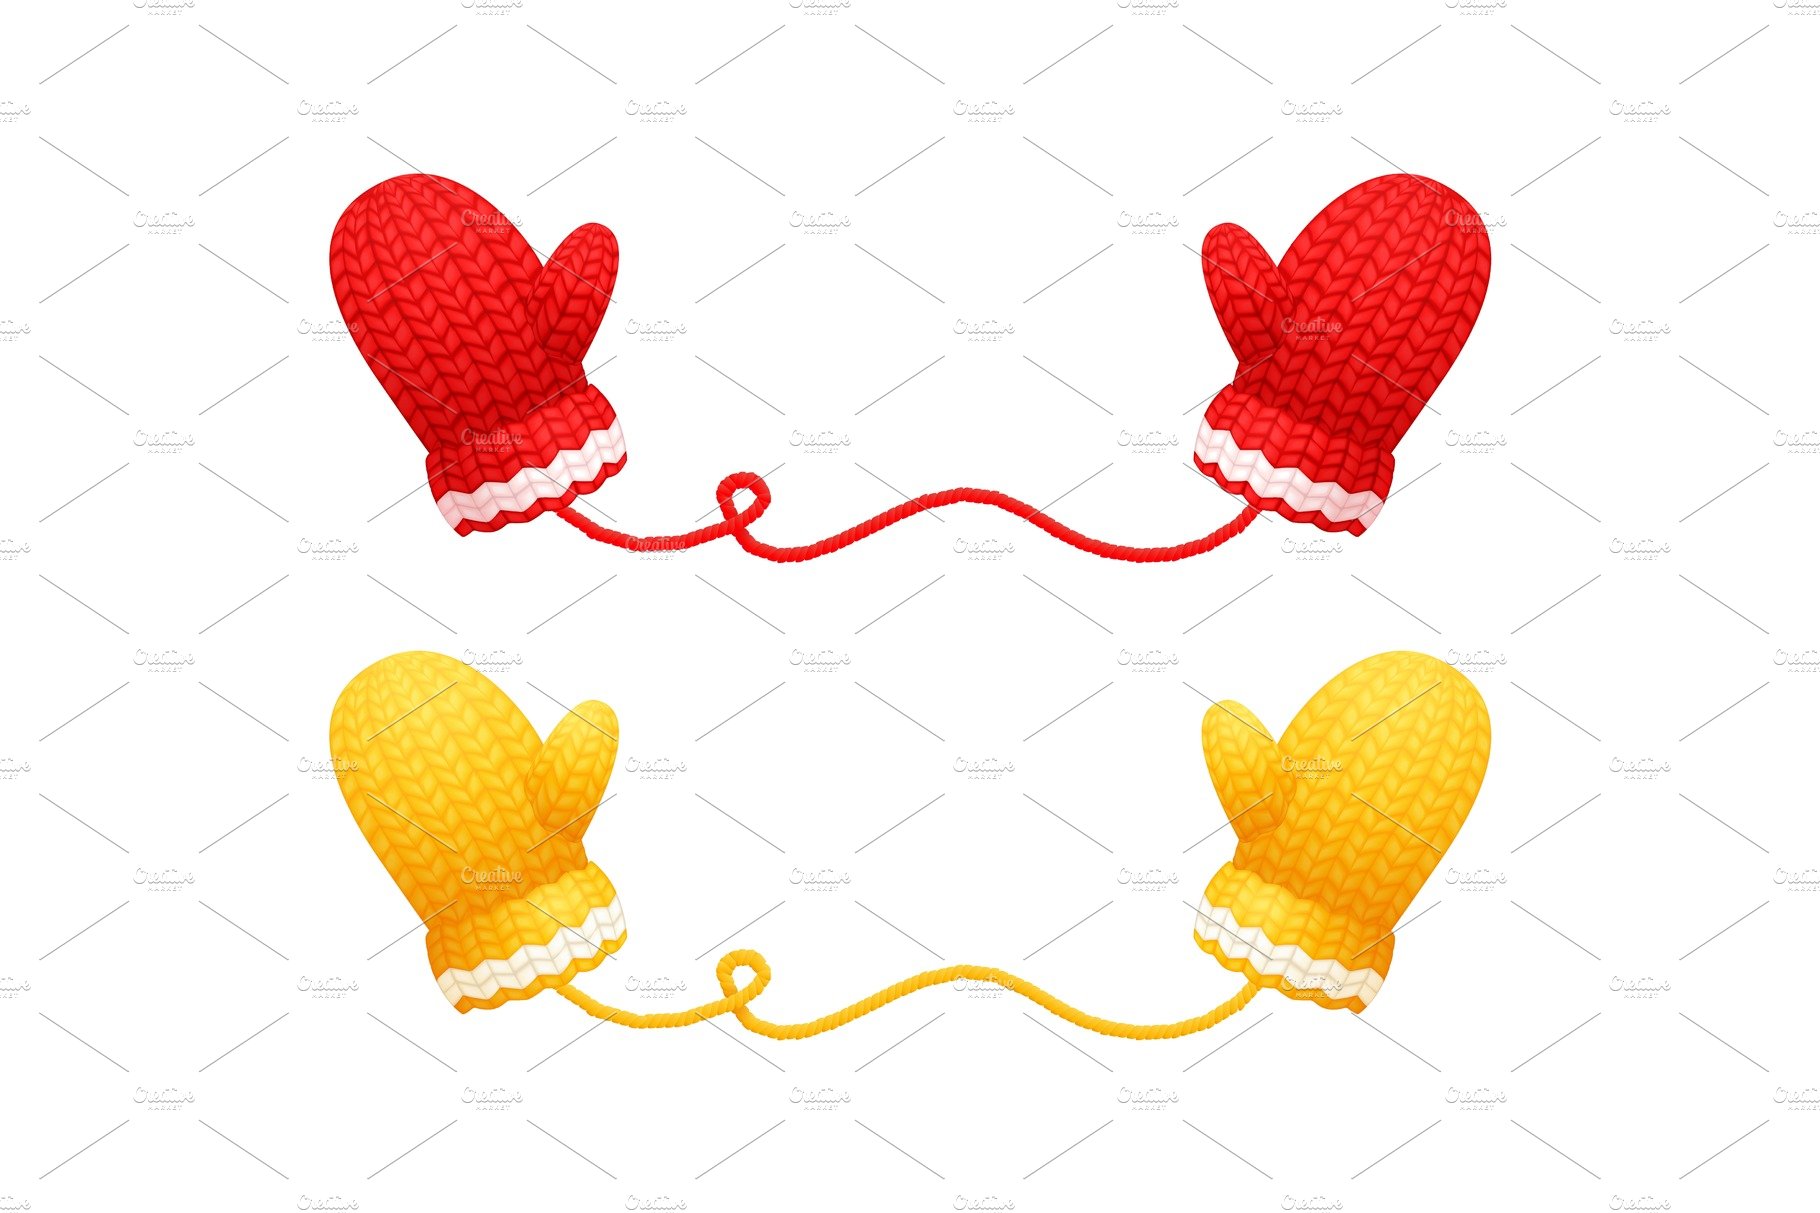 Chunky Knitted Gloves in Red Yellow cover image.